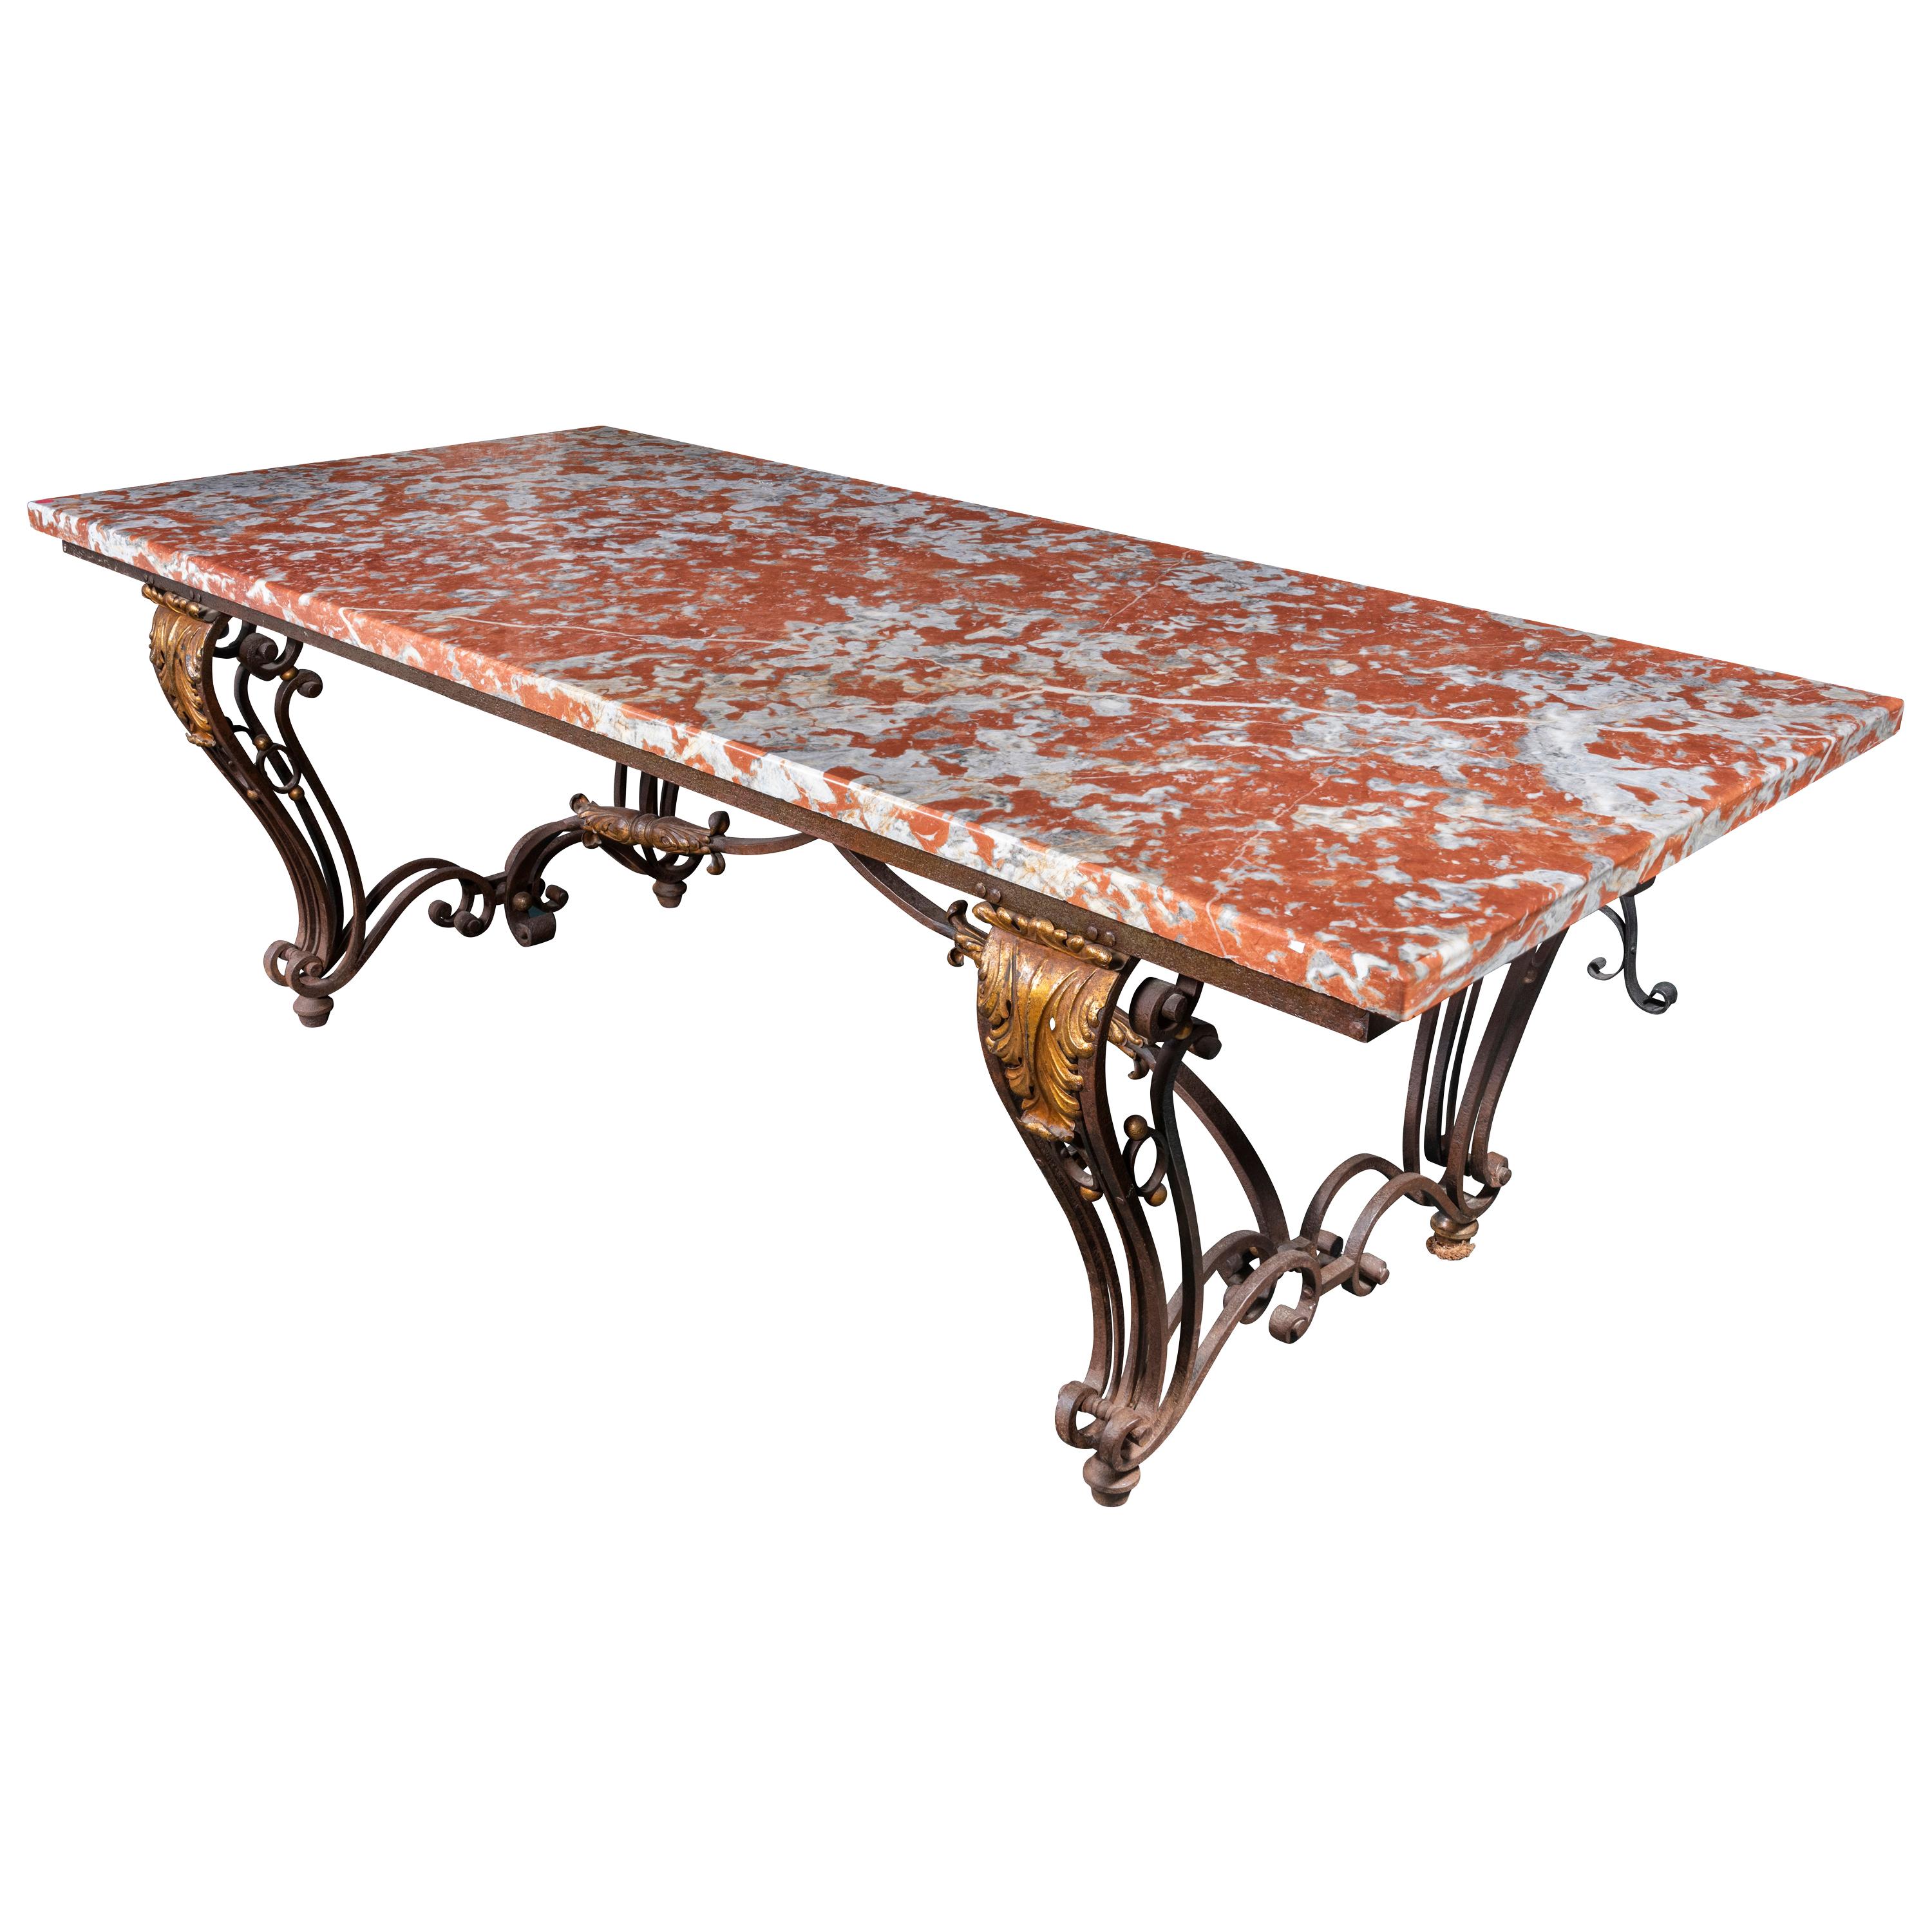 An Early 20th Century French Orange Marble-Top Table on Wrought Iron Base For Sale